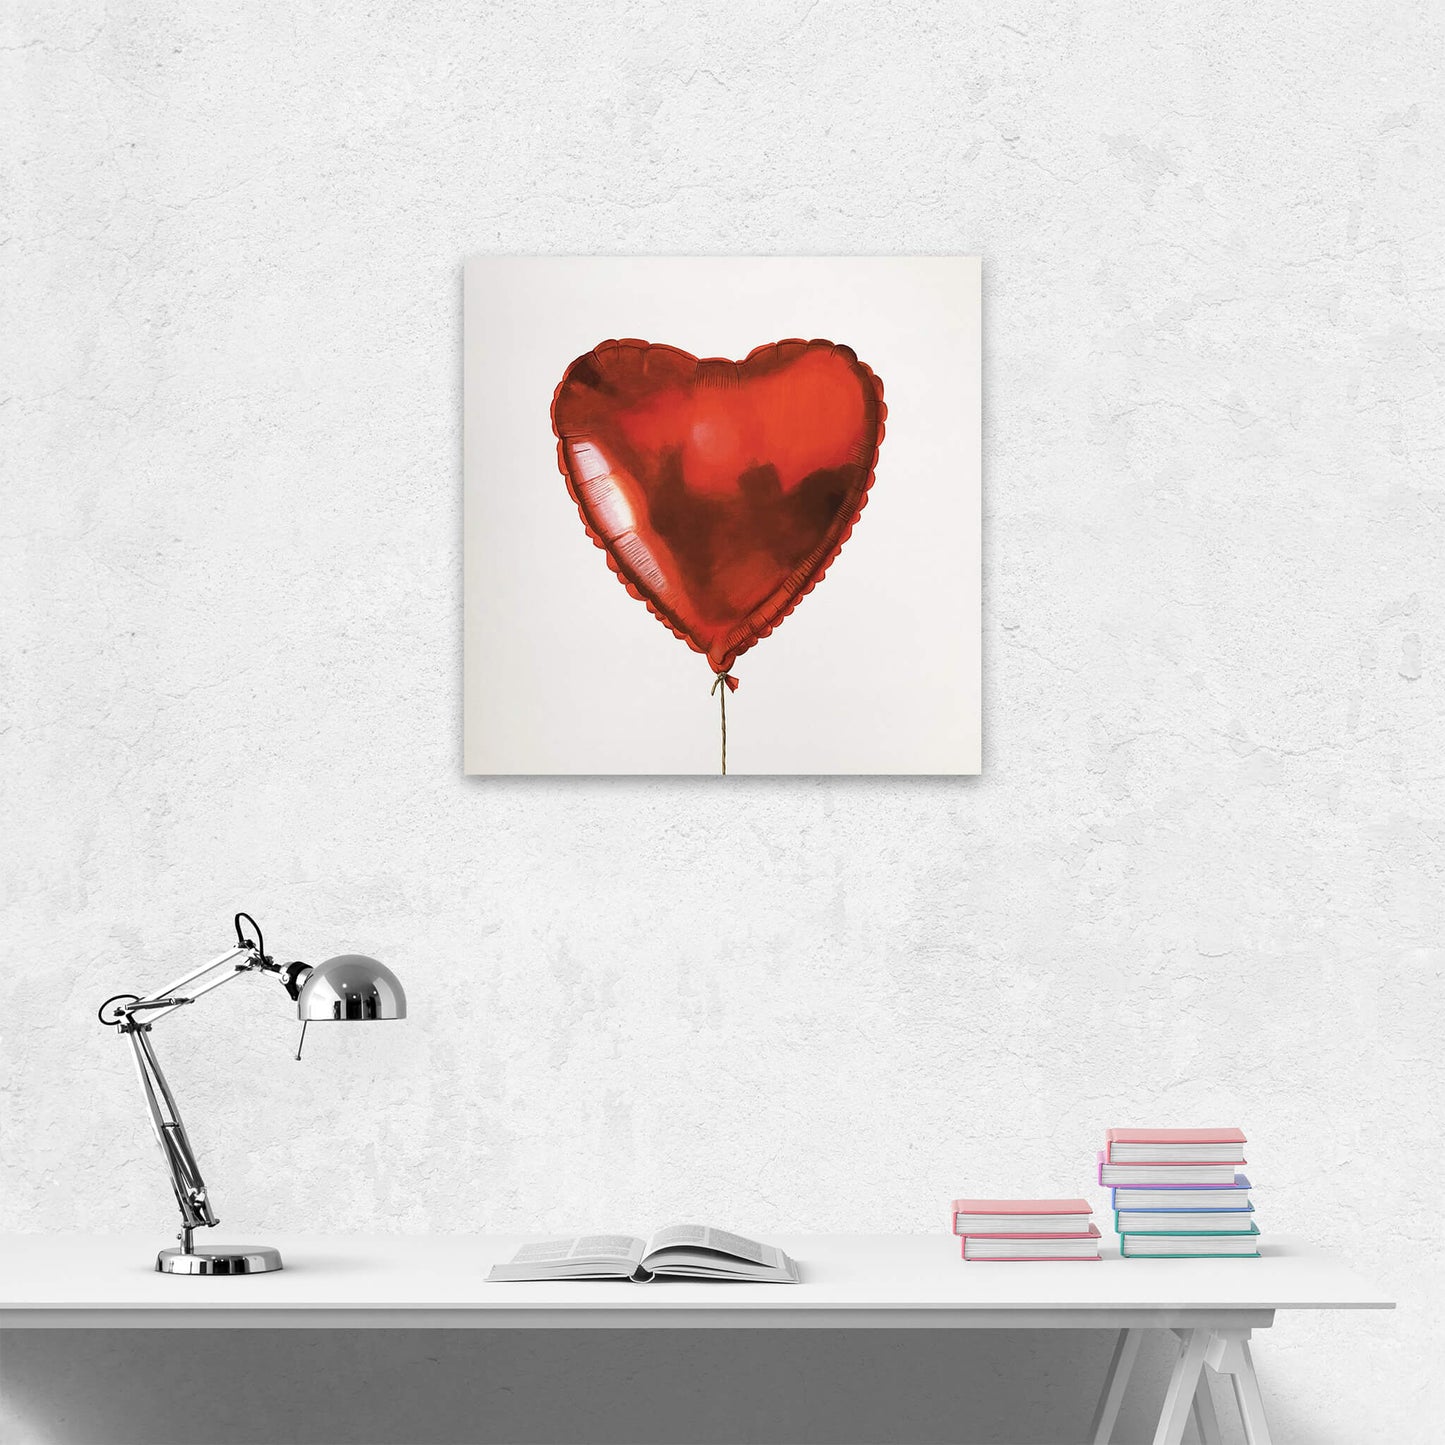 Original painting of a red heart shaped helium balloon by Amanda Gosse